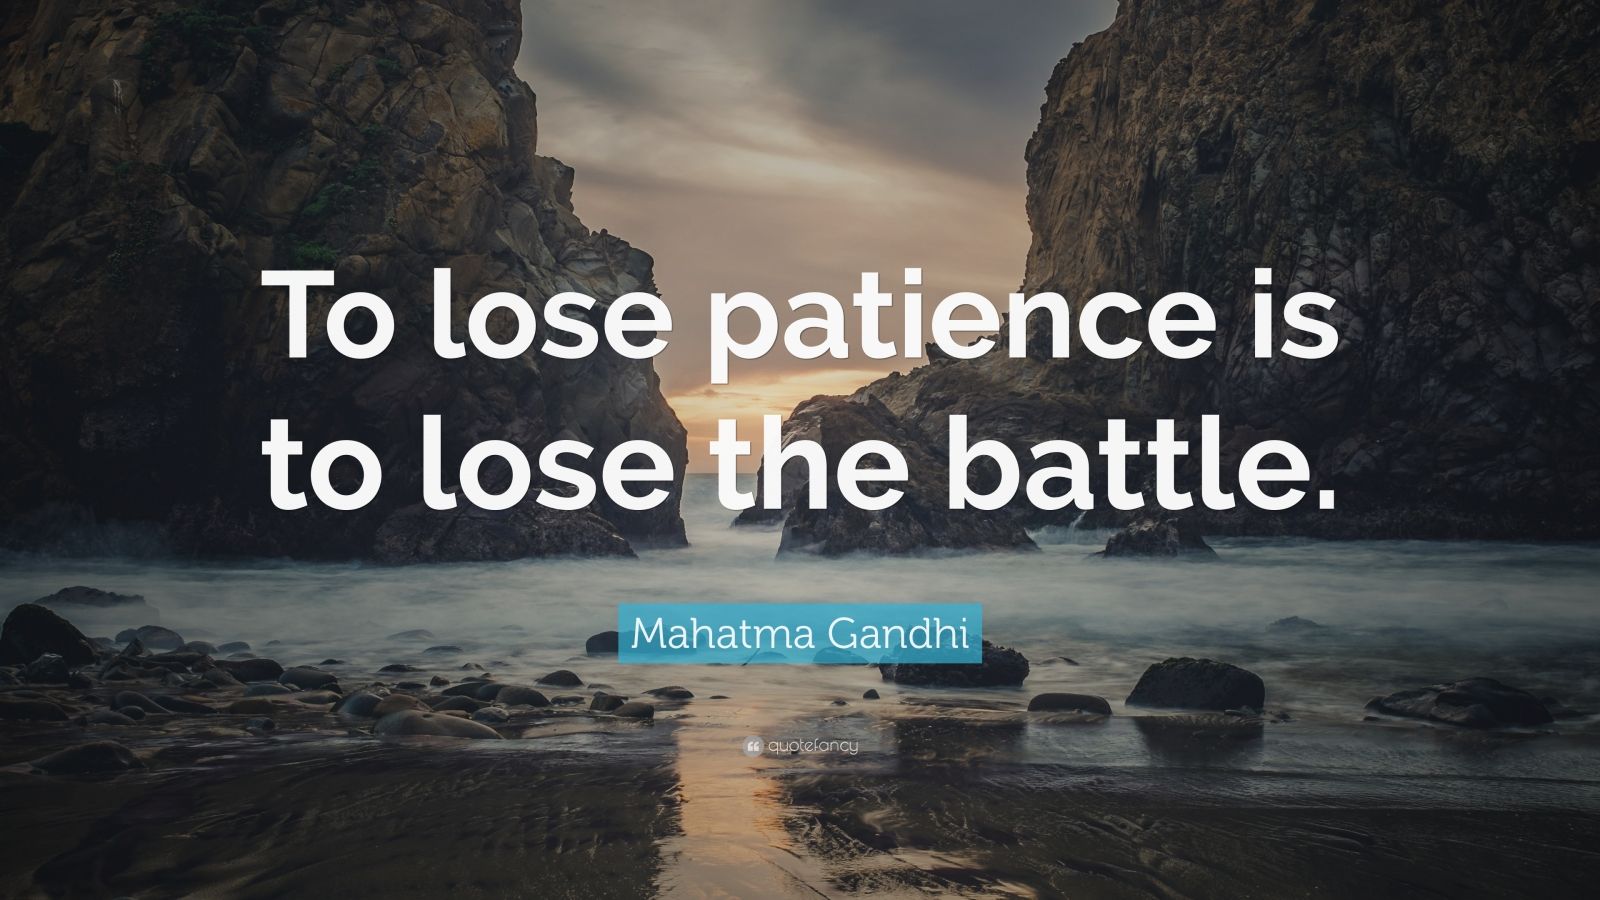 Mahatma Gandhi Quote: “To lose patience is to lose the battle.” (12